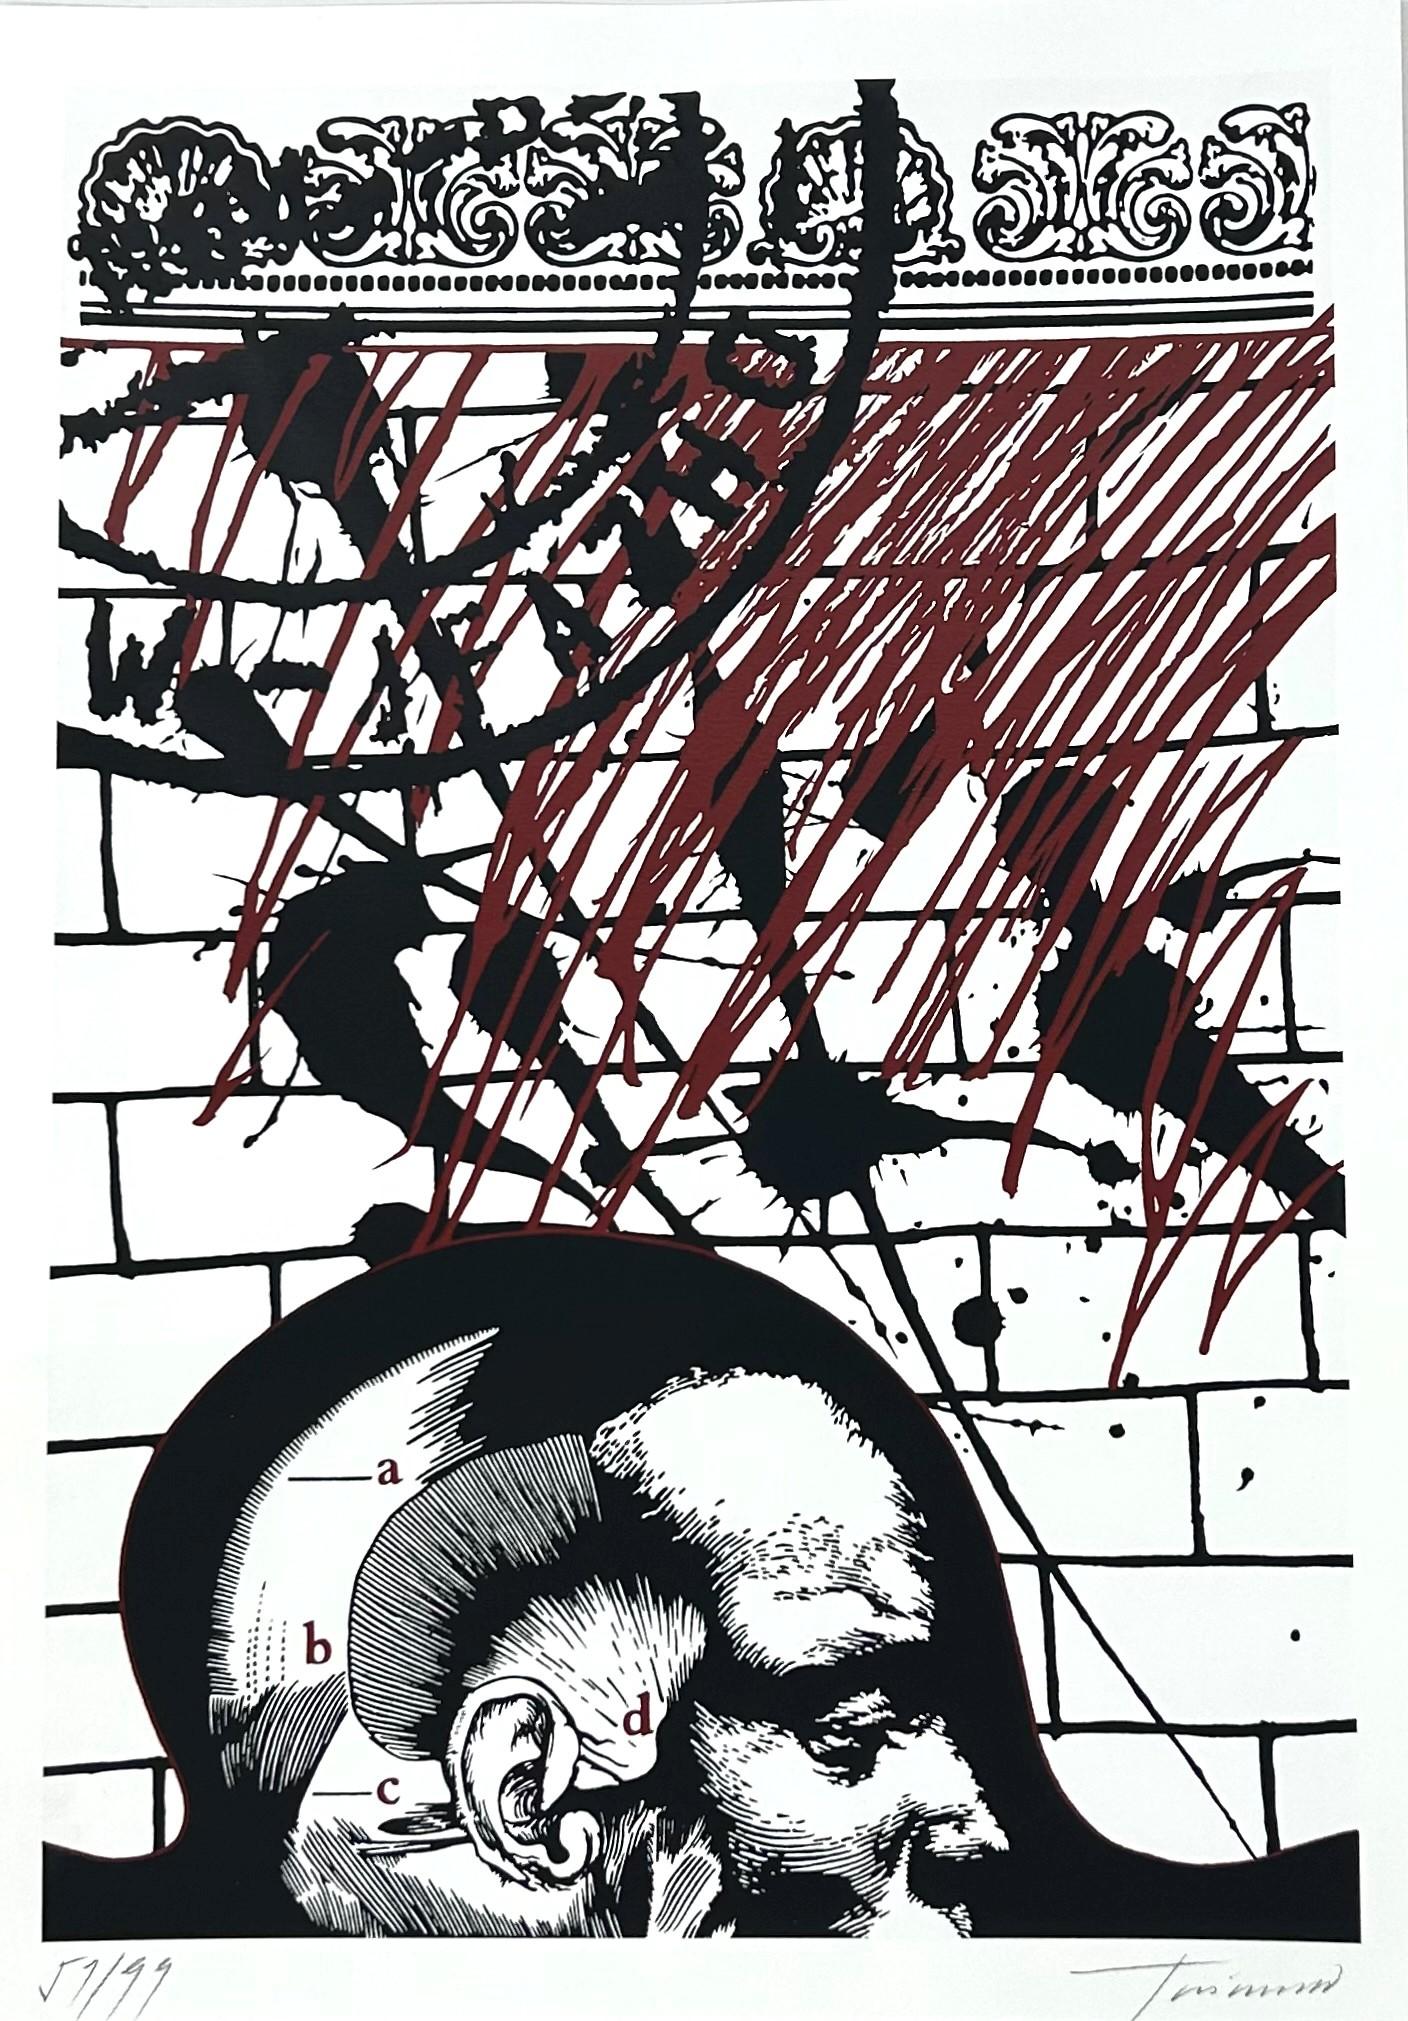 Luis Rodolfo Trimano (Argentina, 1943)
' Untitled V from Estigmas', 2006
silkscreen on paper
19.7 x 27.6 in. (50 x 70 cm.)
Edition of 99
Unframed
ID: TRI1706-001-106_5
Hand-signed by author